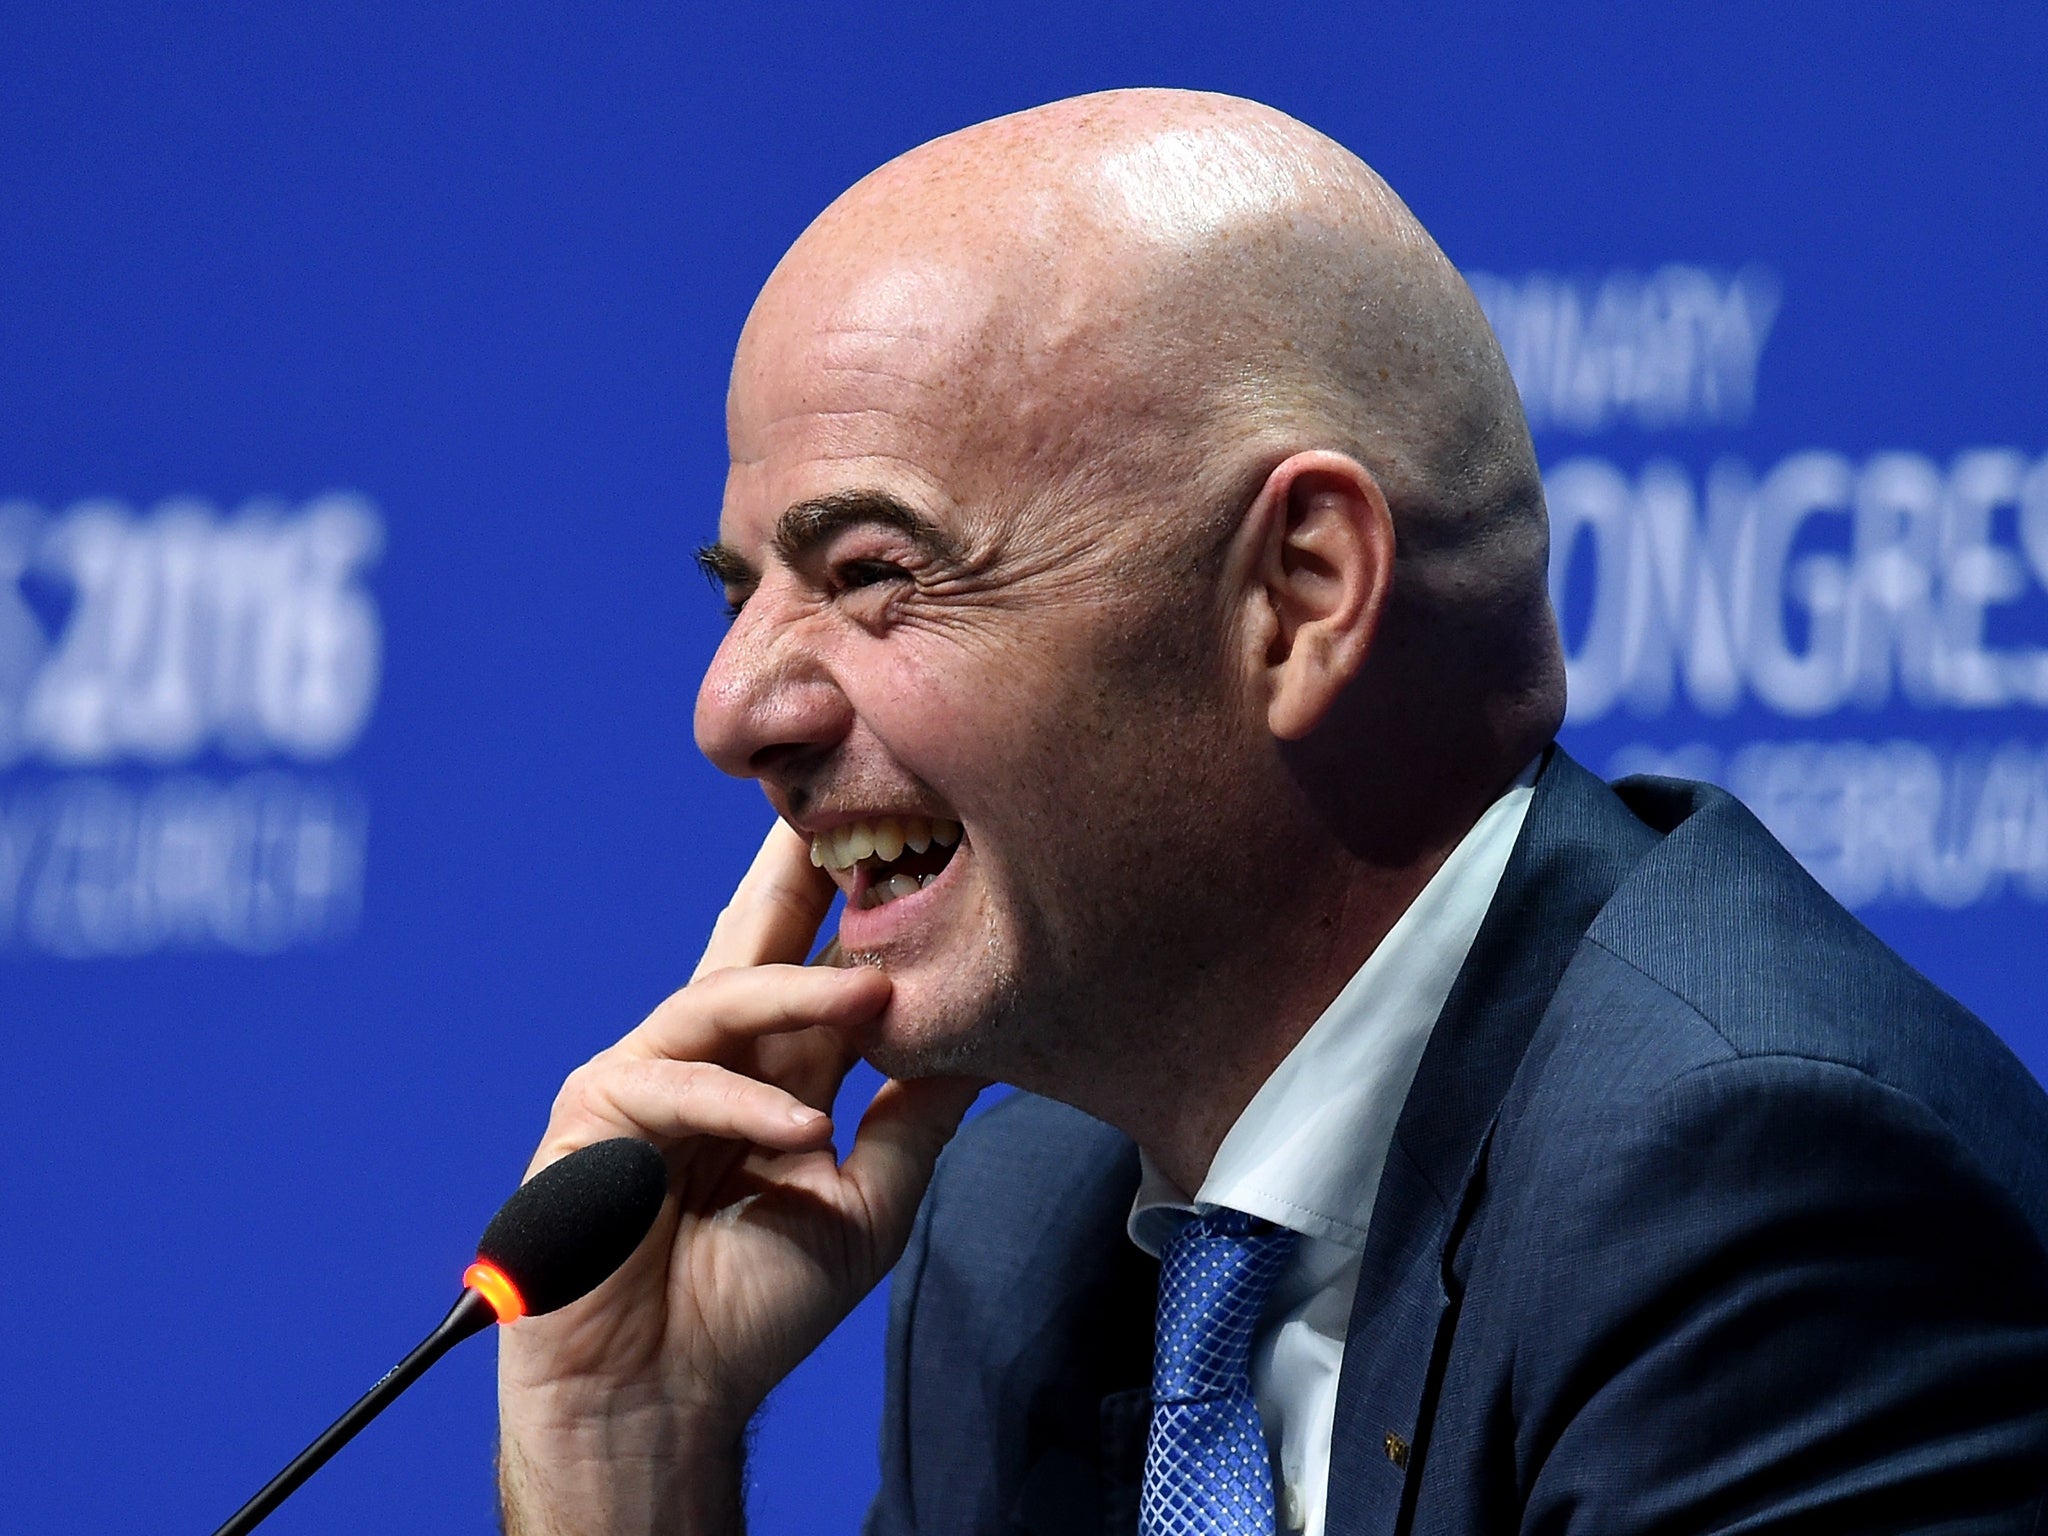 Gianni Infantino gestures as hespeaking in Zurich yesterday: he promised to share out Fifa’s wealth more widely reuters